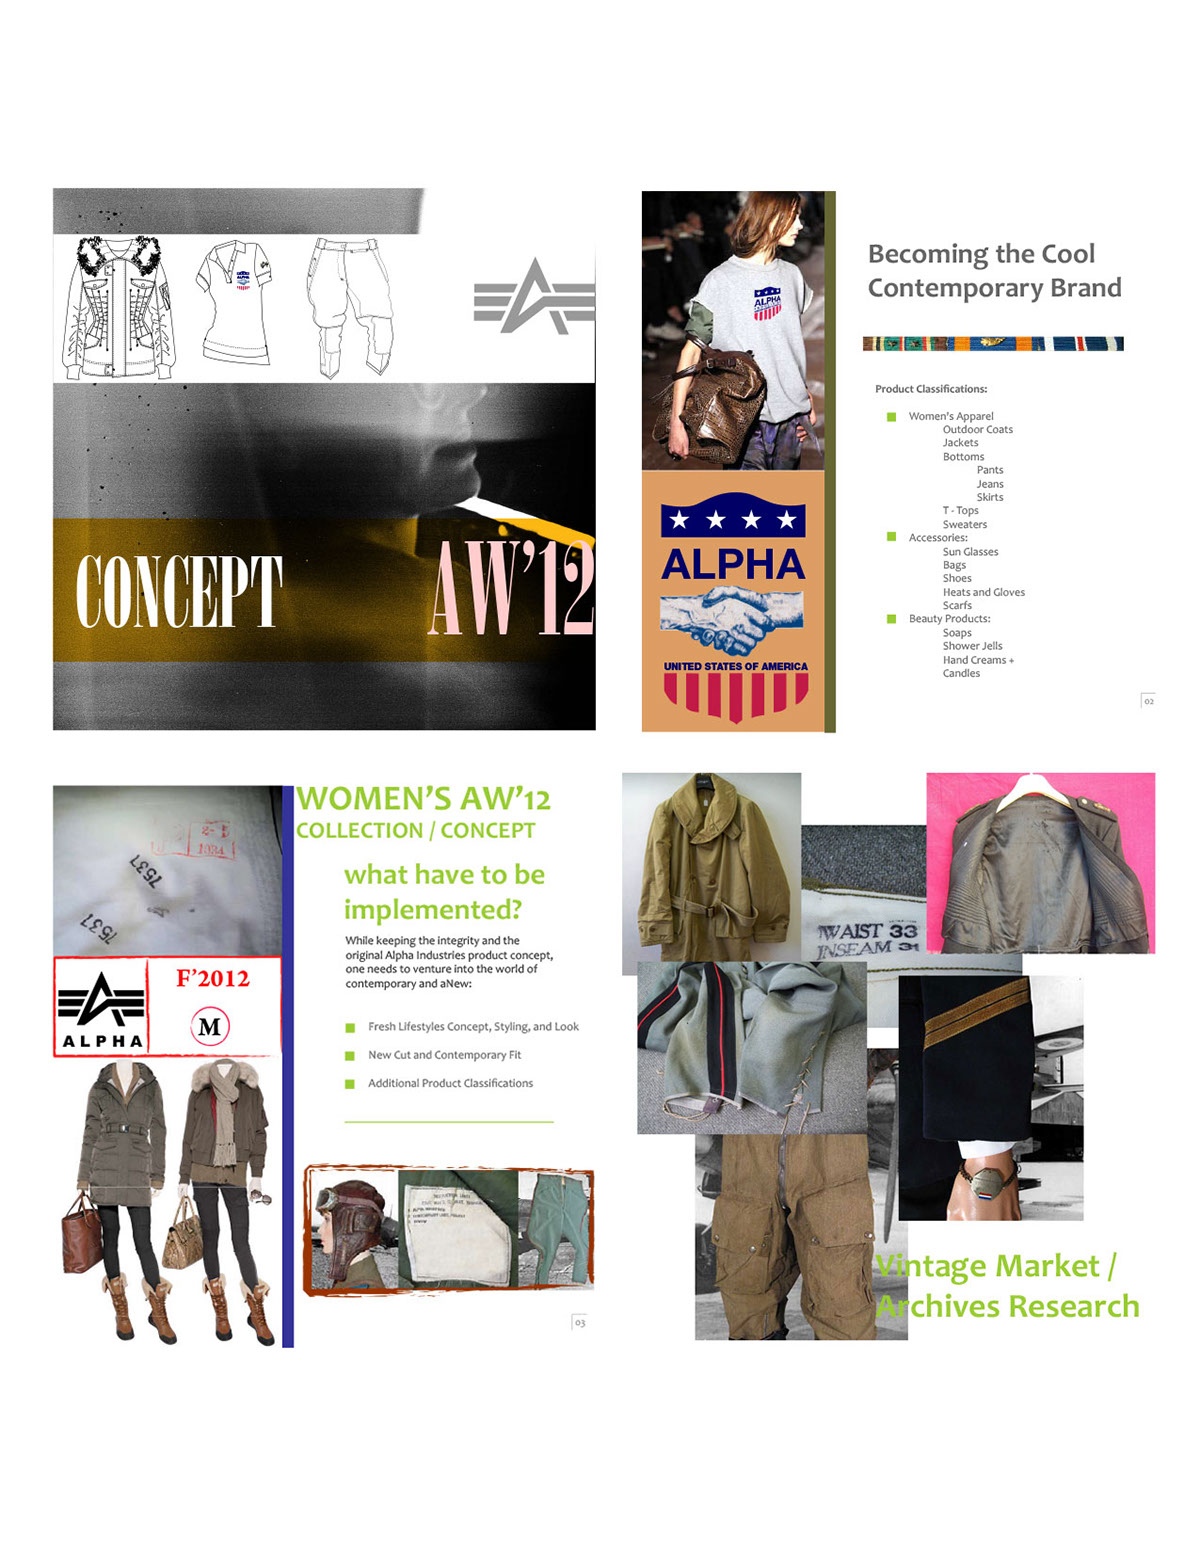 Outerwear Mens and Wonens lifestyle brands